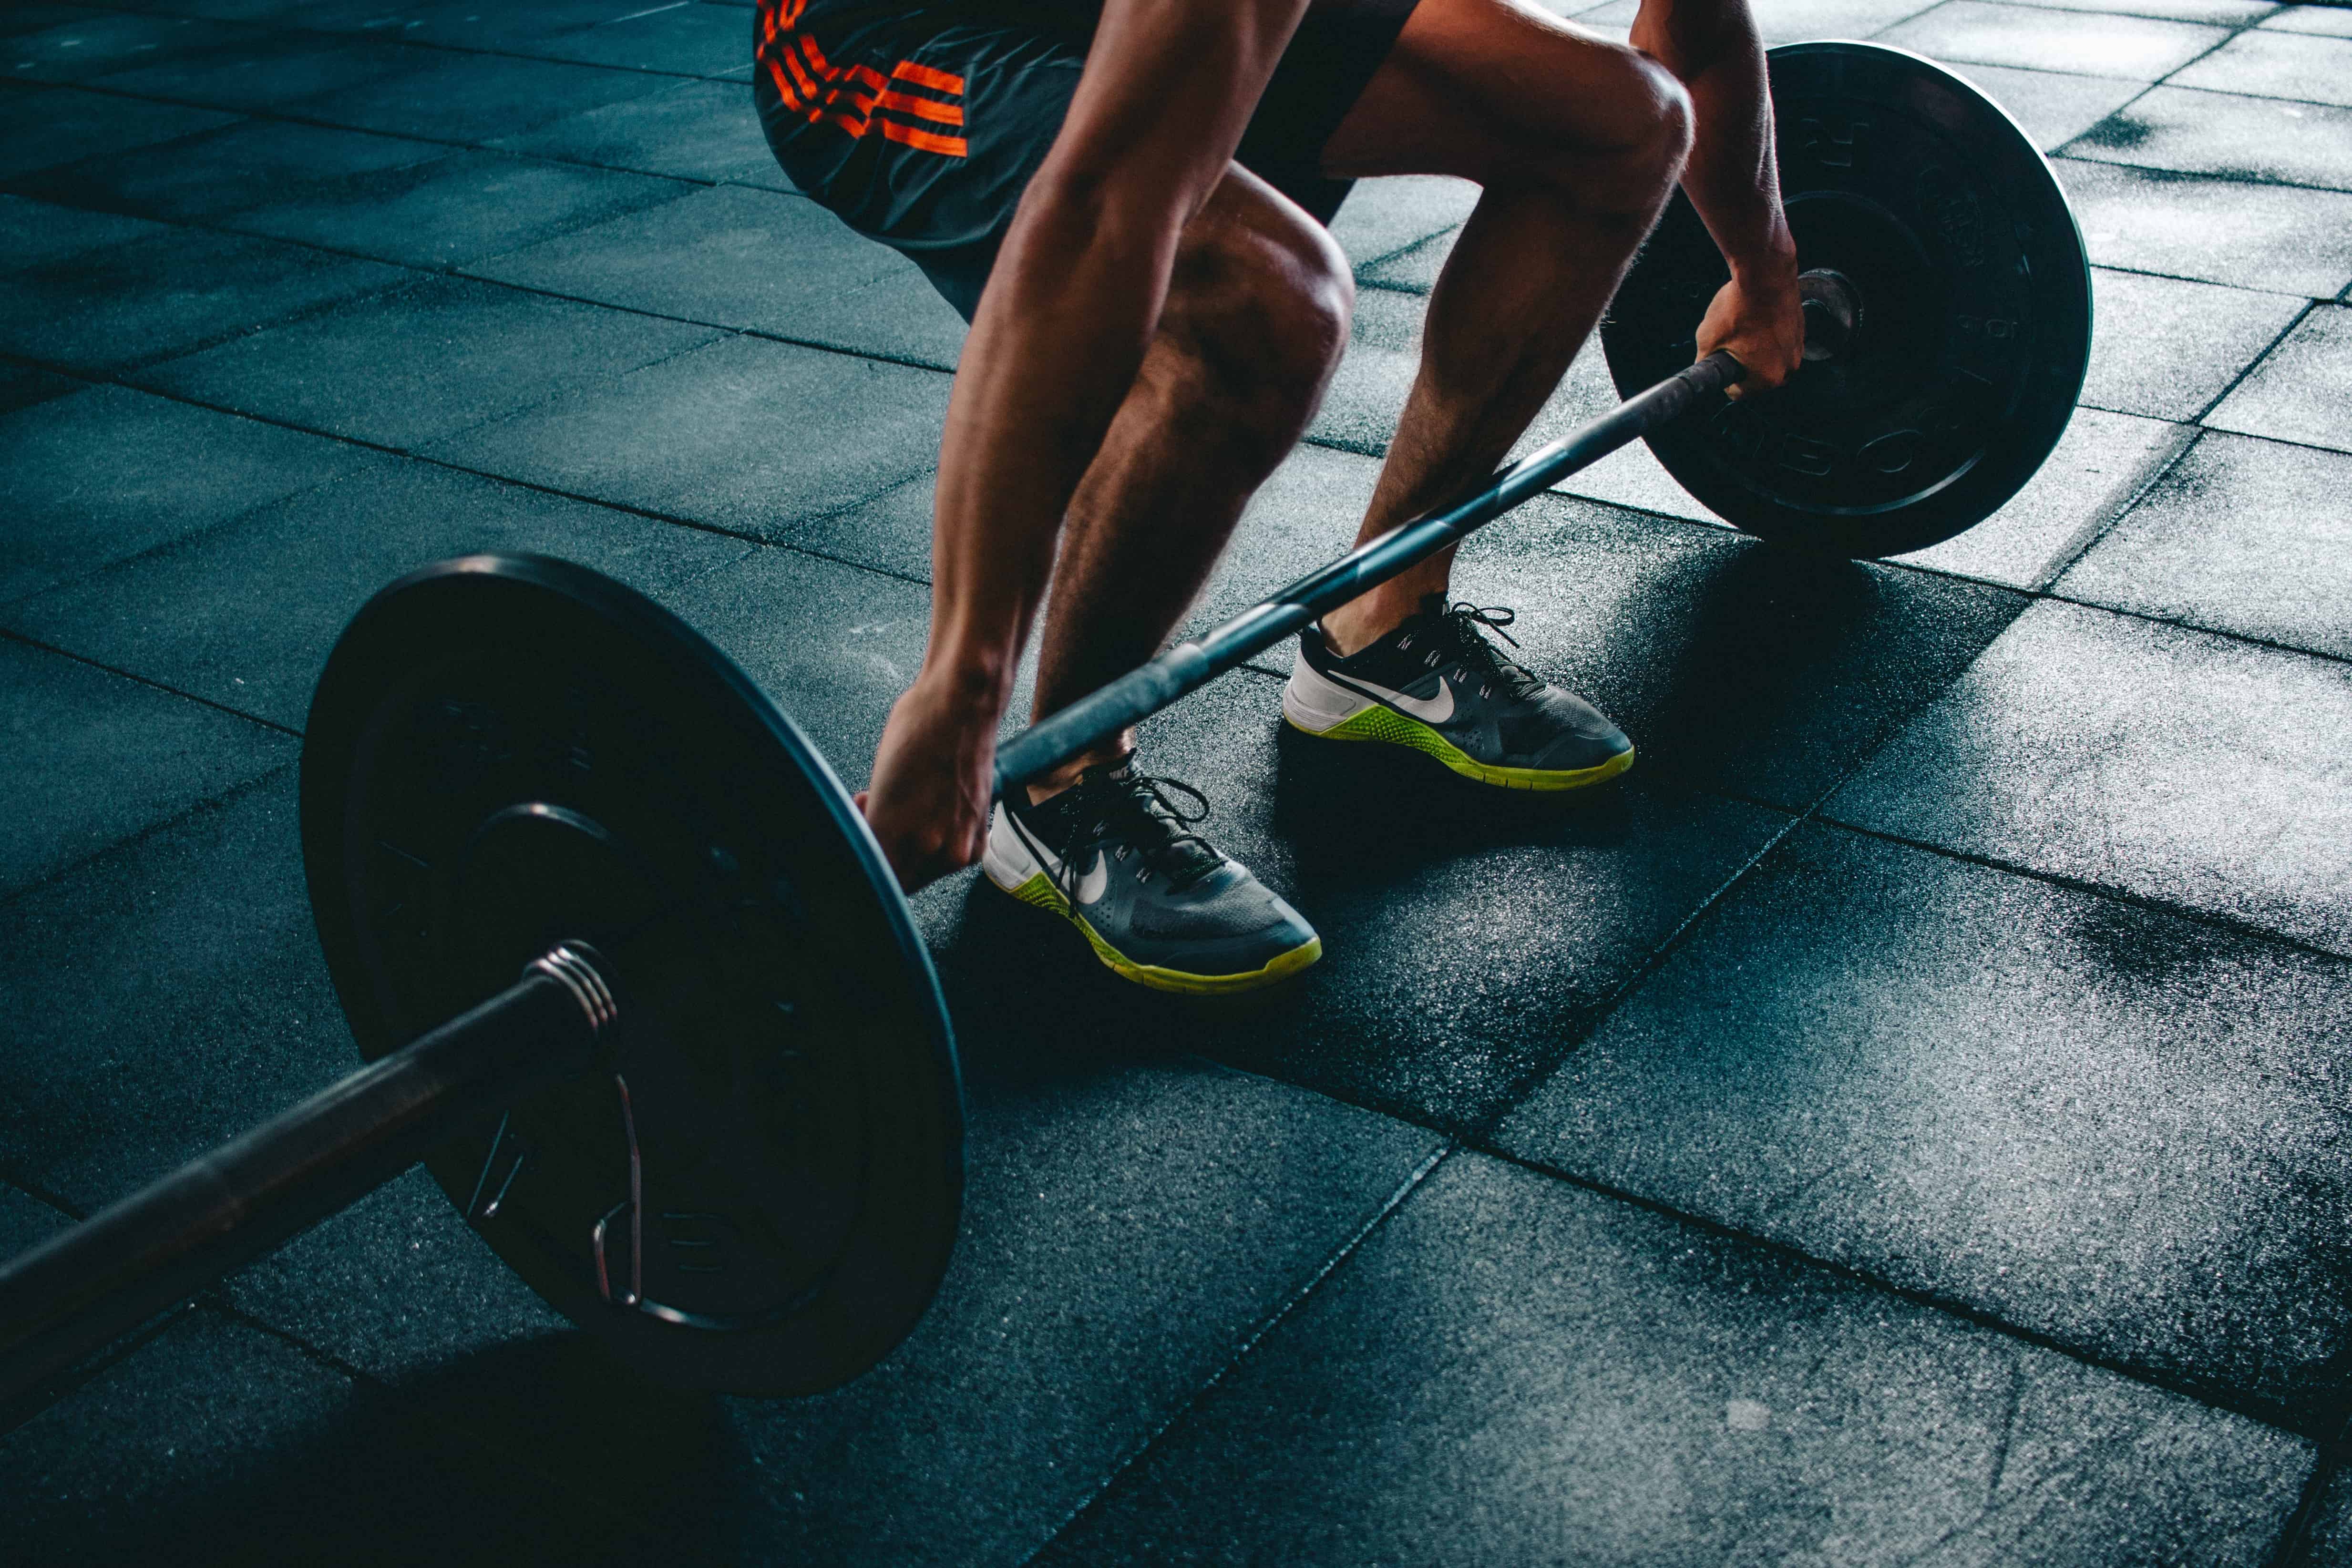 Squatting with weights to improve ski fitness